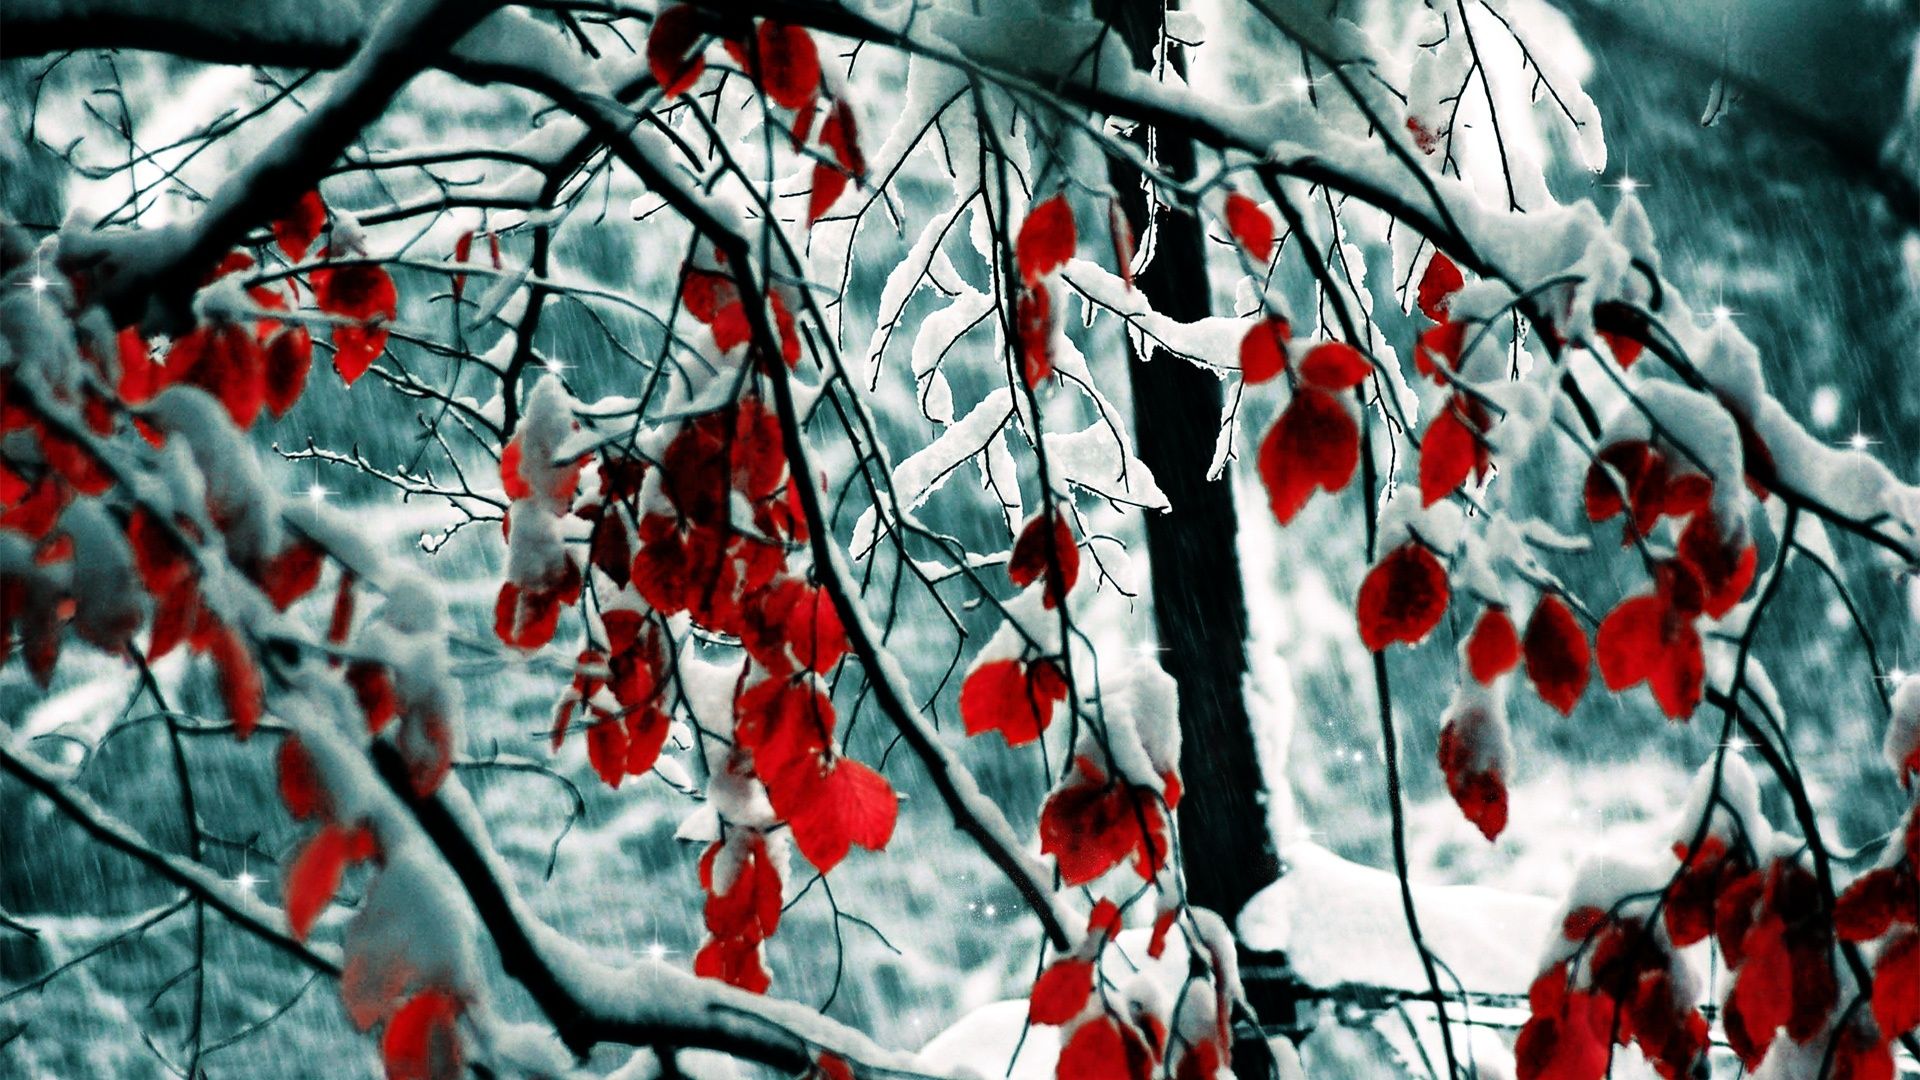 Snow Leaves Wallpaper in jpg format for free download